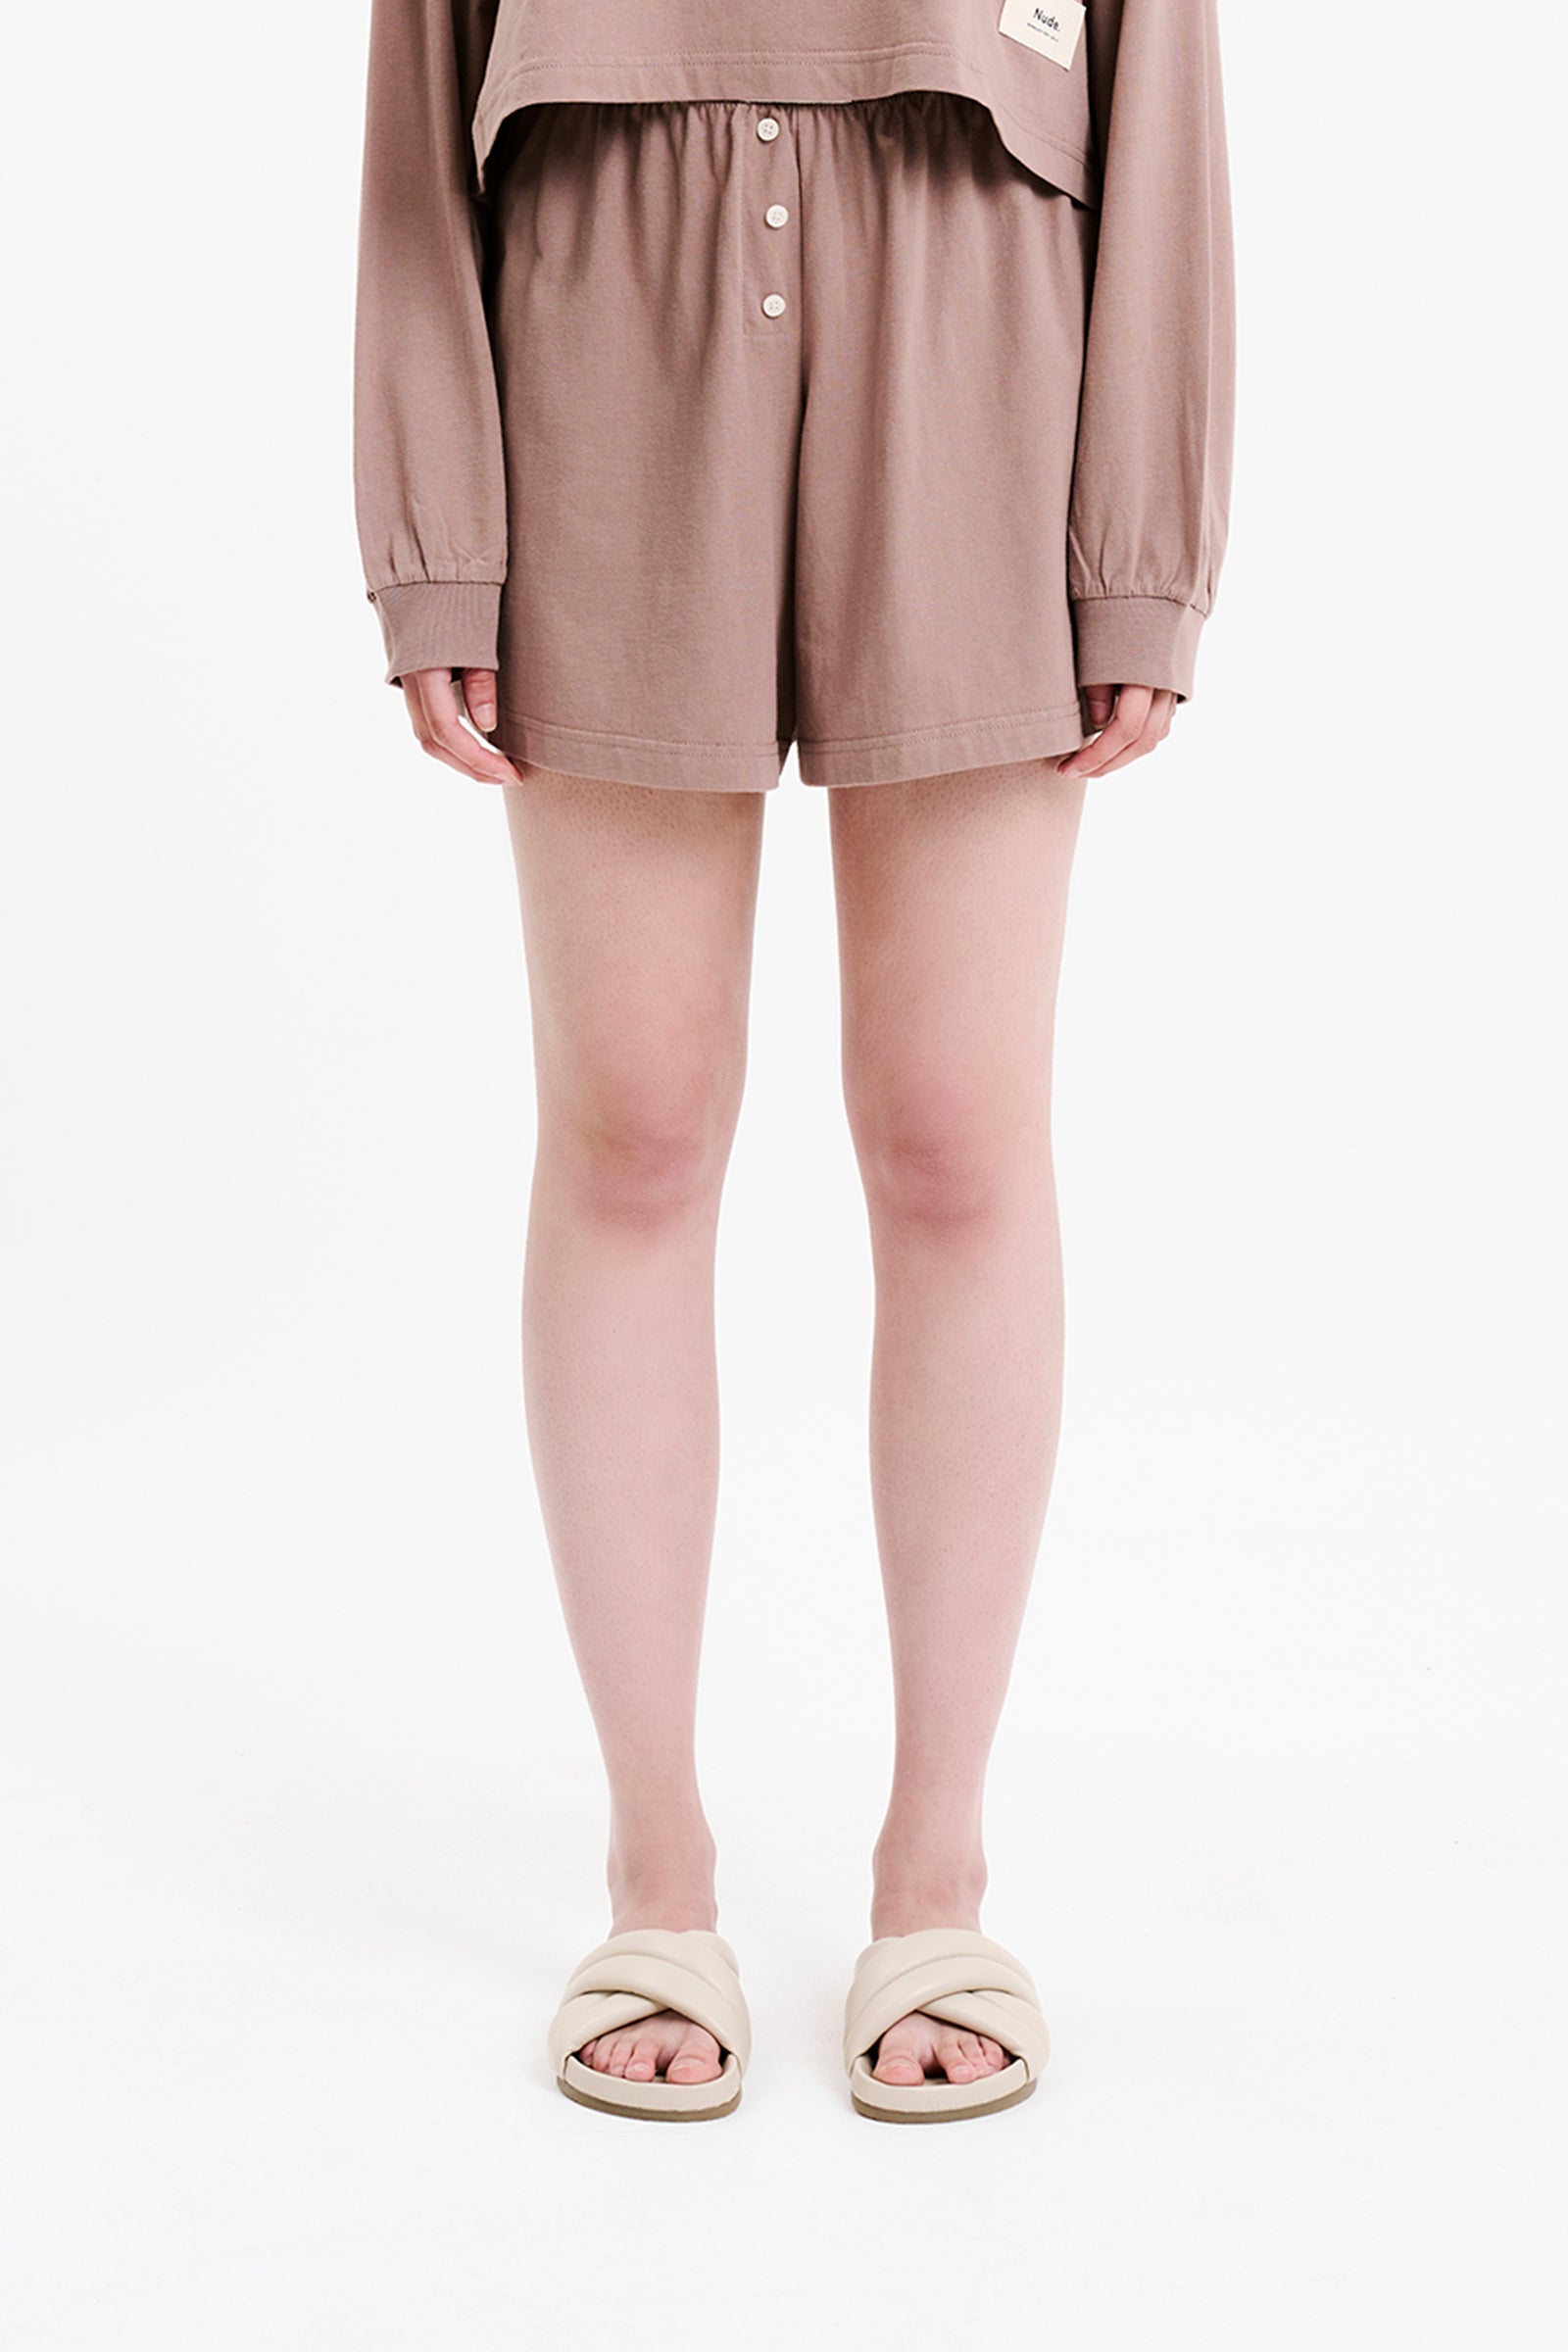 Nude Lucy Lounge Jersey Boxer Short In A Brown Carob Colour 